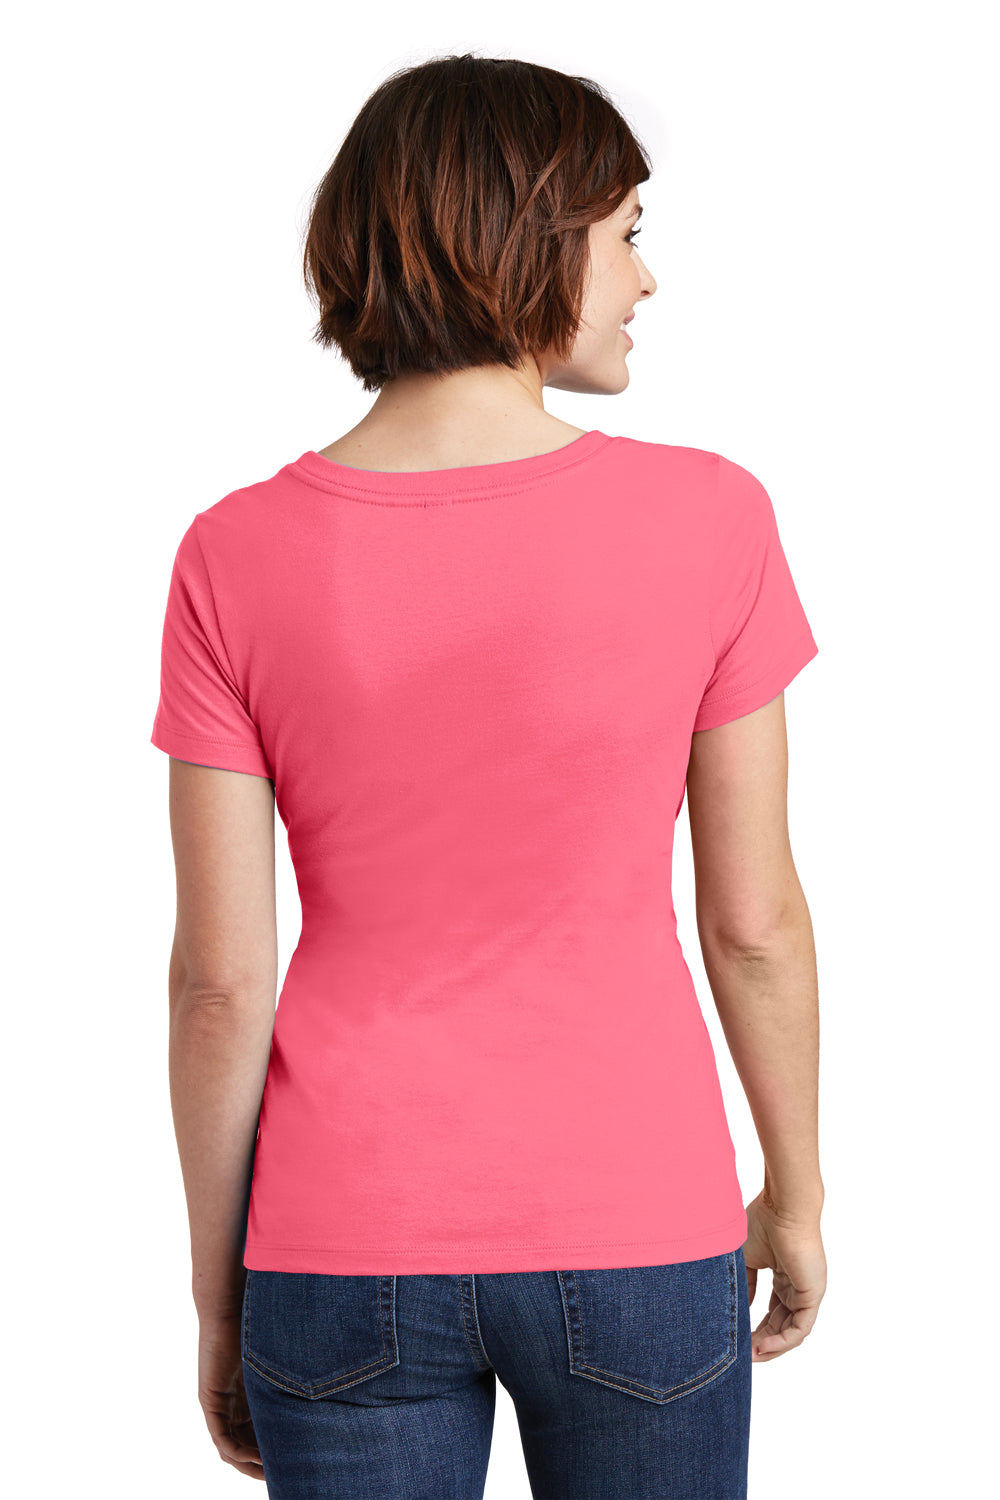 District DM106L Womens Perfect Weight Short Sleeve Scoop Neck T-Shirt Coral Pink Back